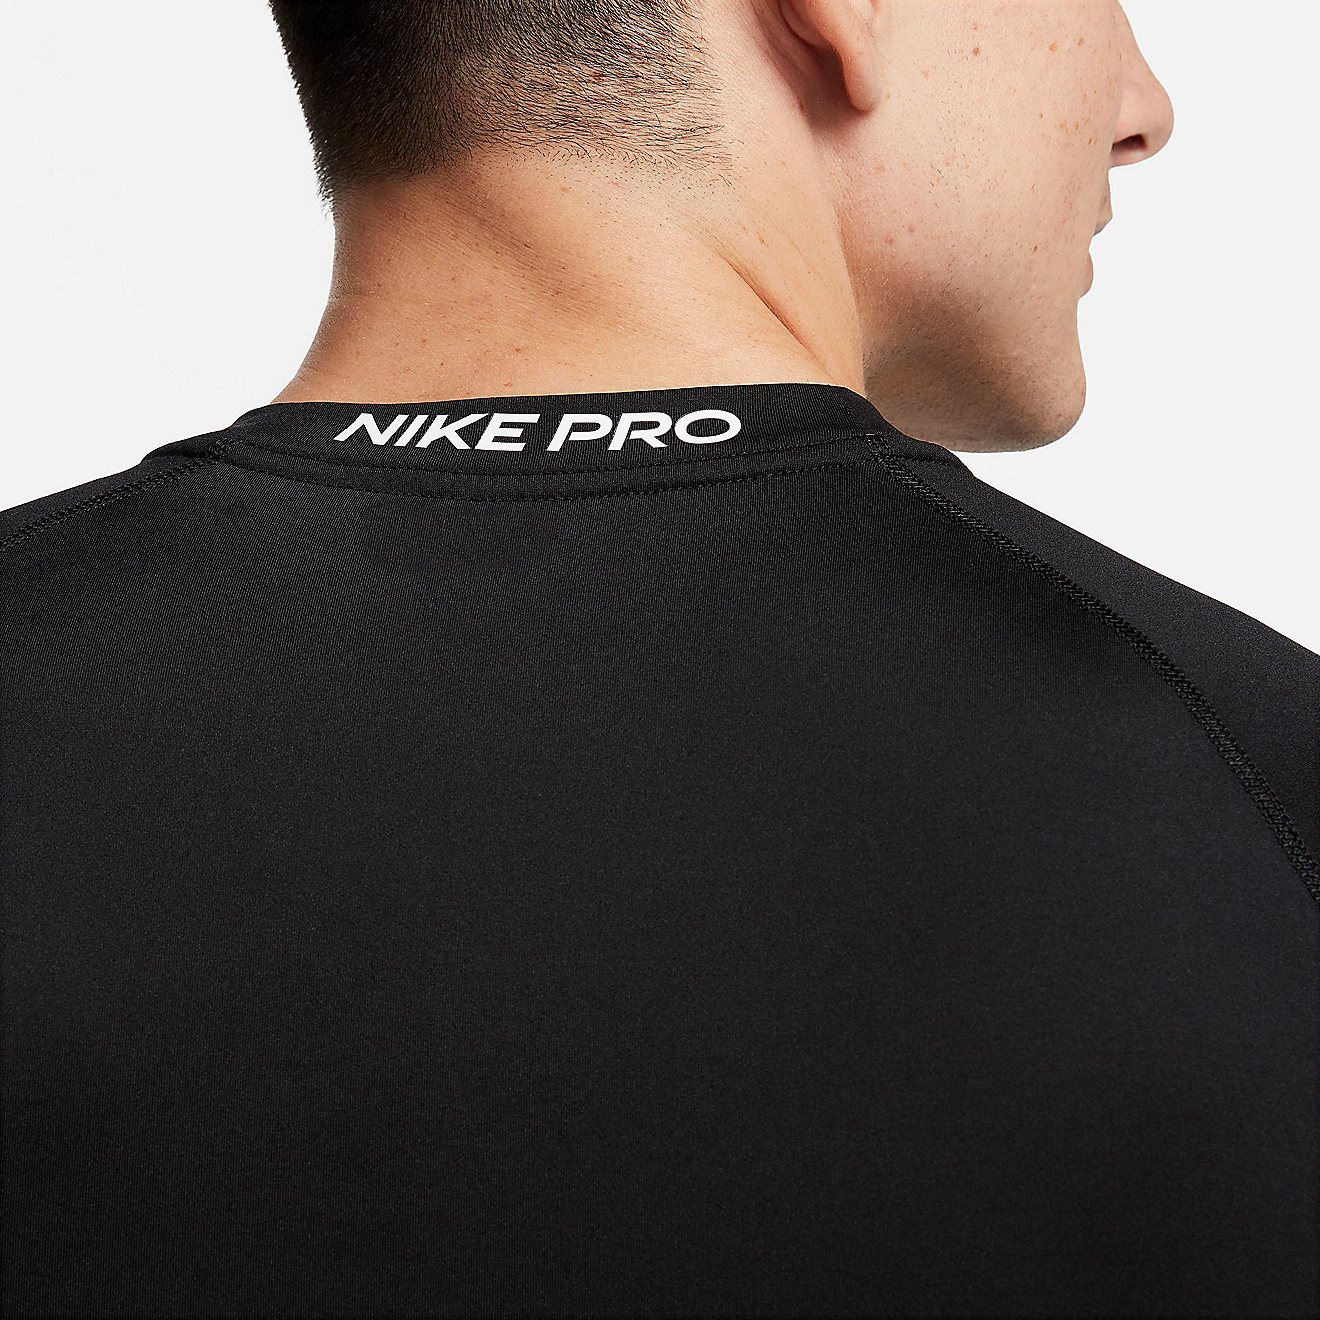 Nike Men's Slim Short Sleeve Top | Free Shipping at Academy